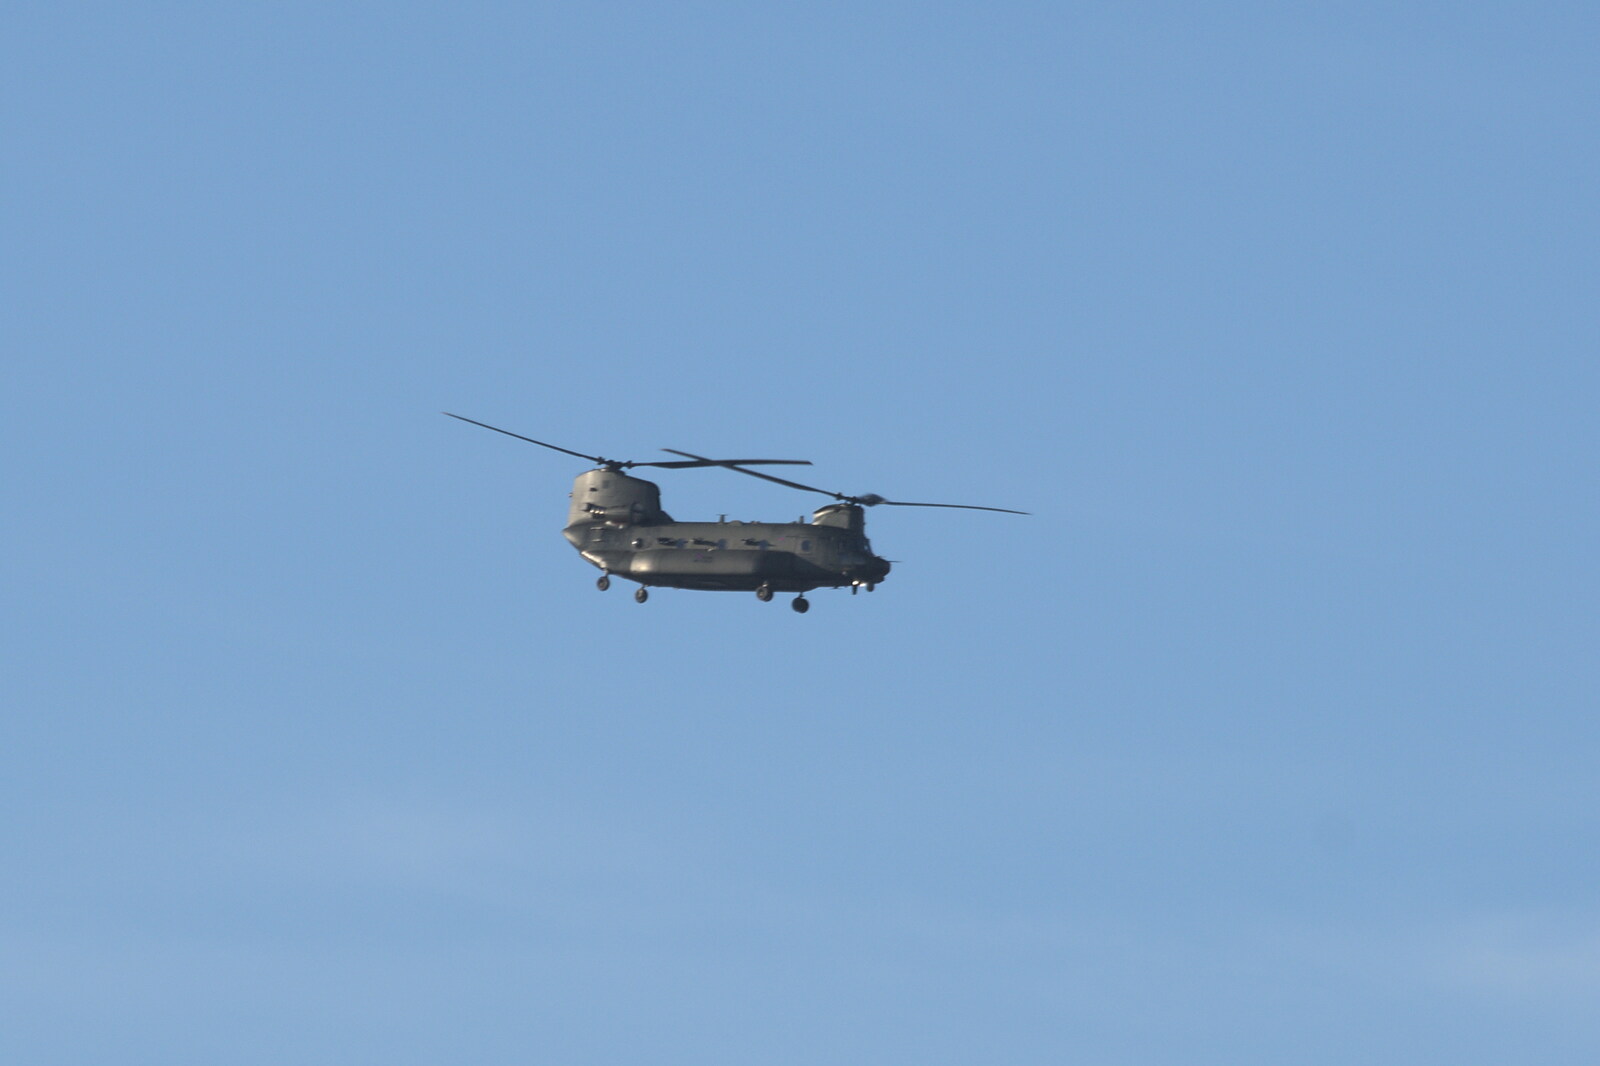 A Chinook helicopter clatters over from A Visit to Blickling Hall, Aylsham, Norfolk - 9th January 2022